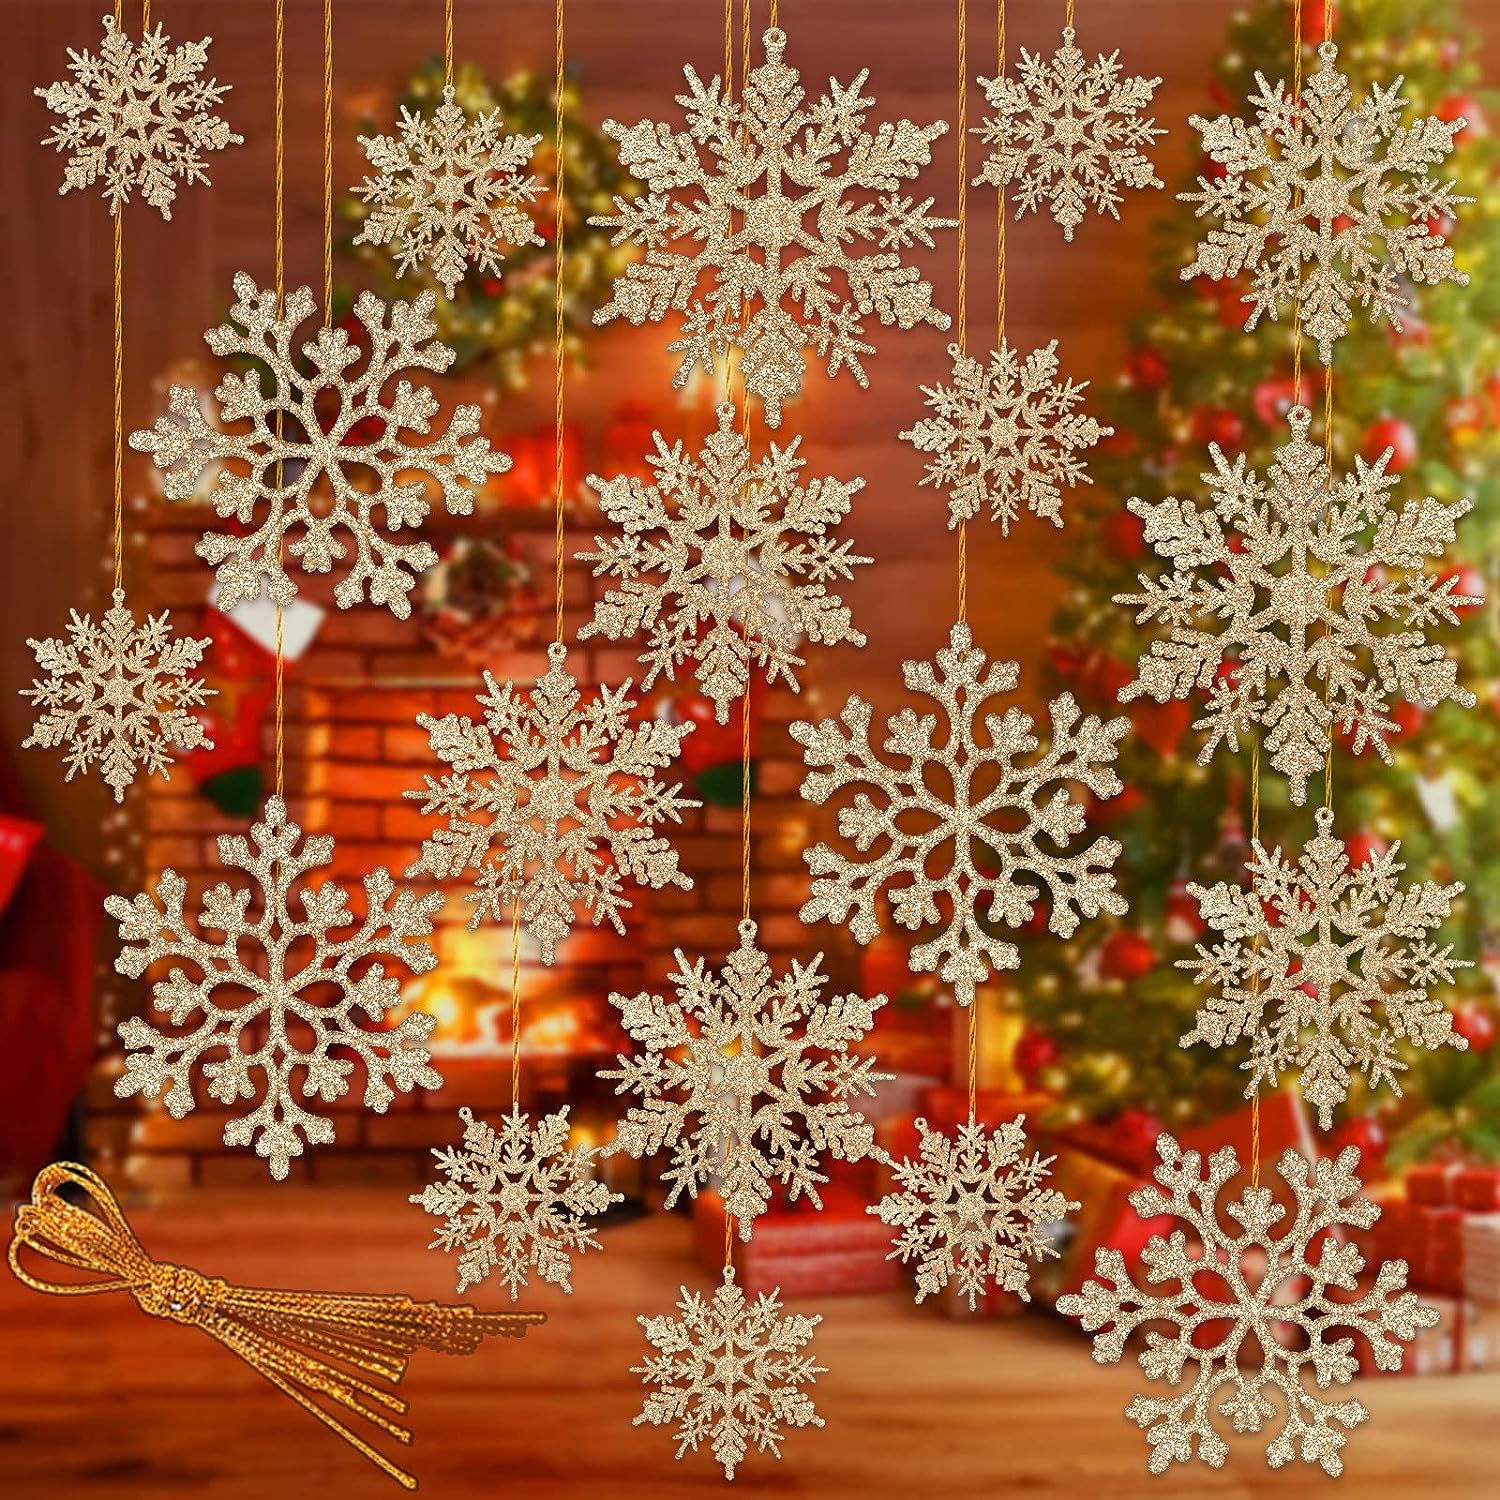 Snowflake Ornaments Plastic Glitter Snow Flakes Hanging Ornaments for  Winter Christmas Tree Decorations Craft Snowflakes